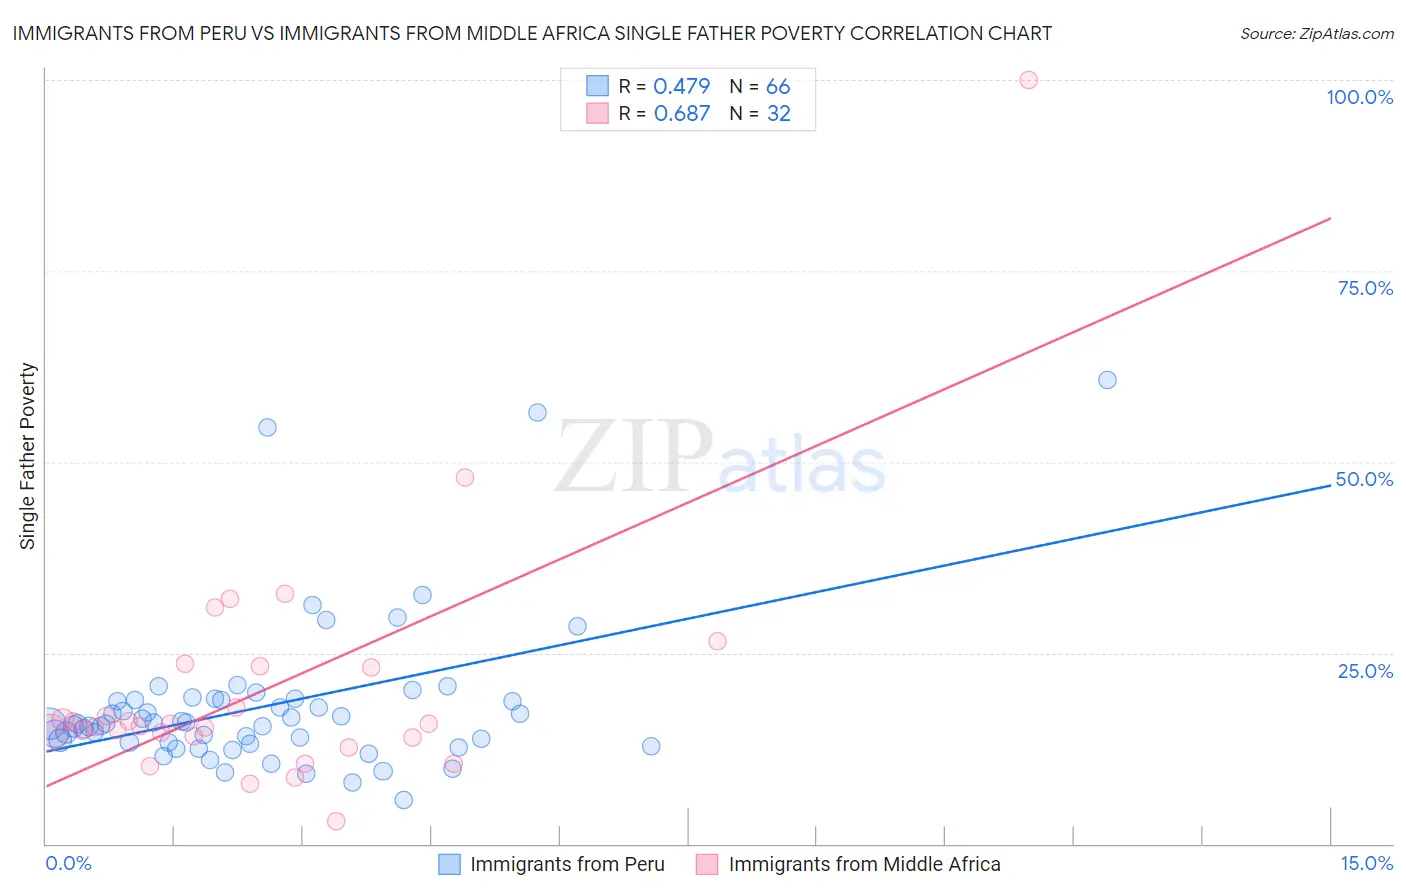 Immigrants from Peru vs Immigrants from Middle Africa Single Father Poverty